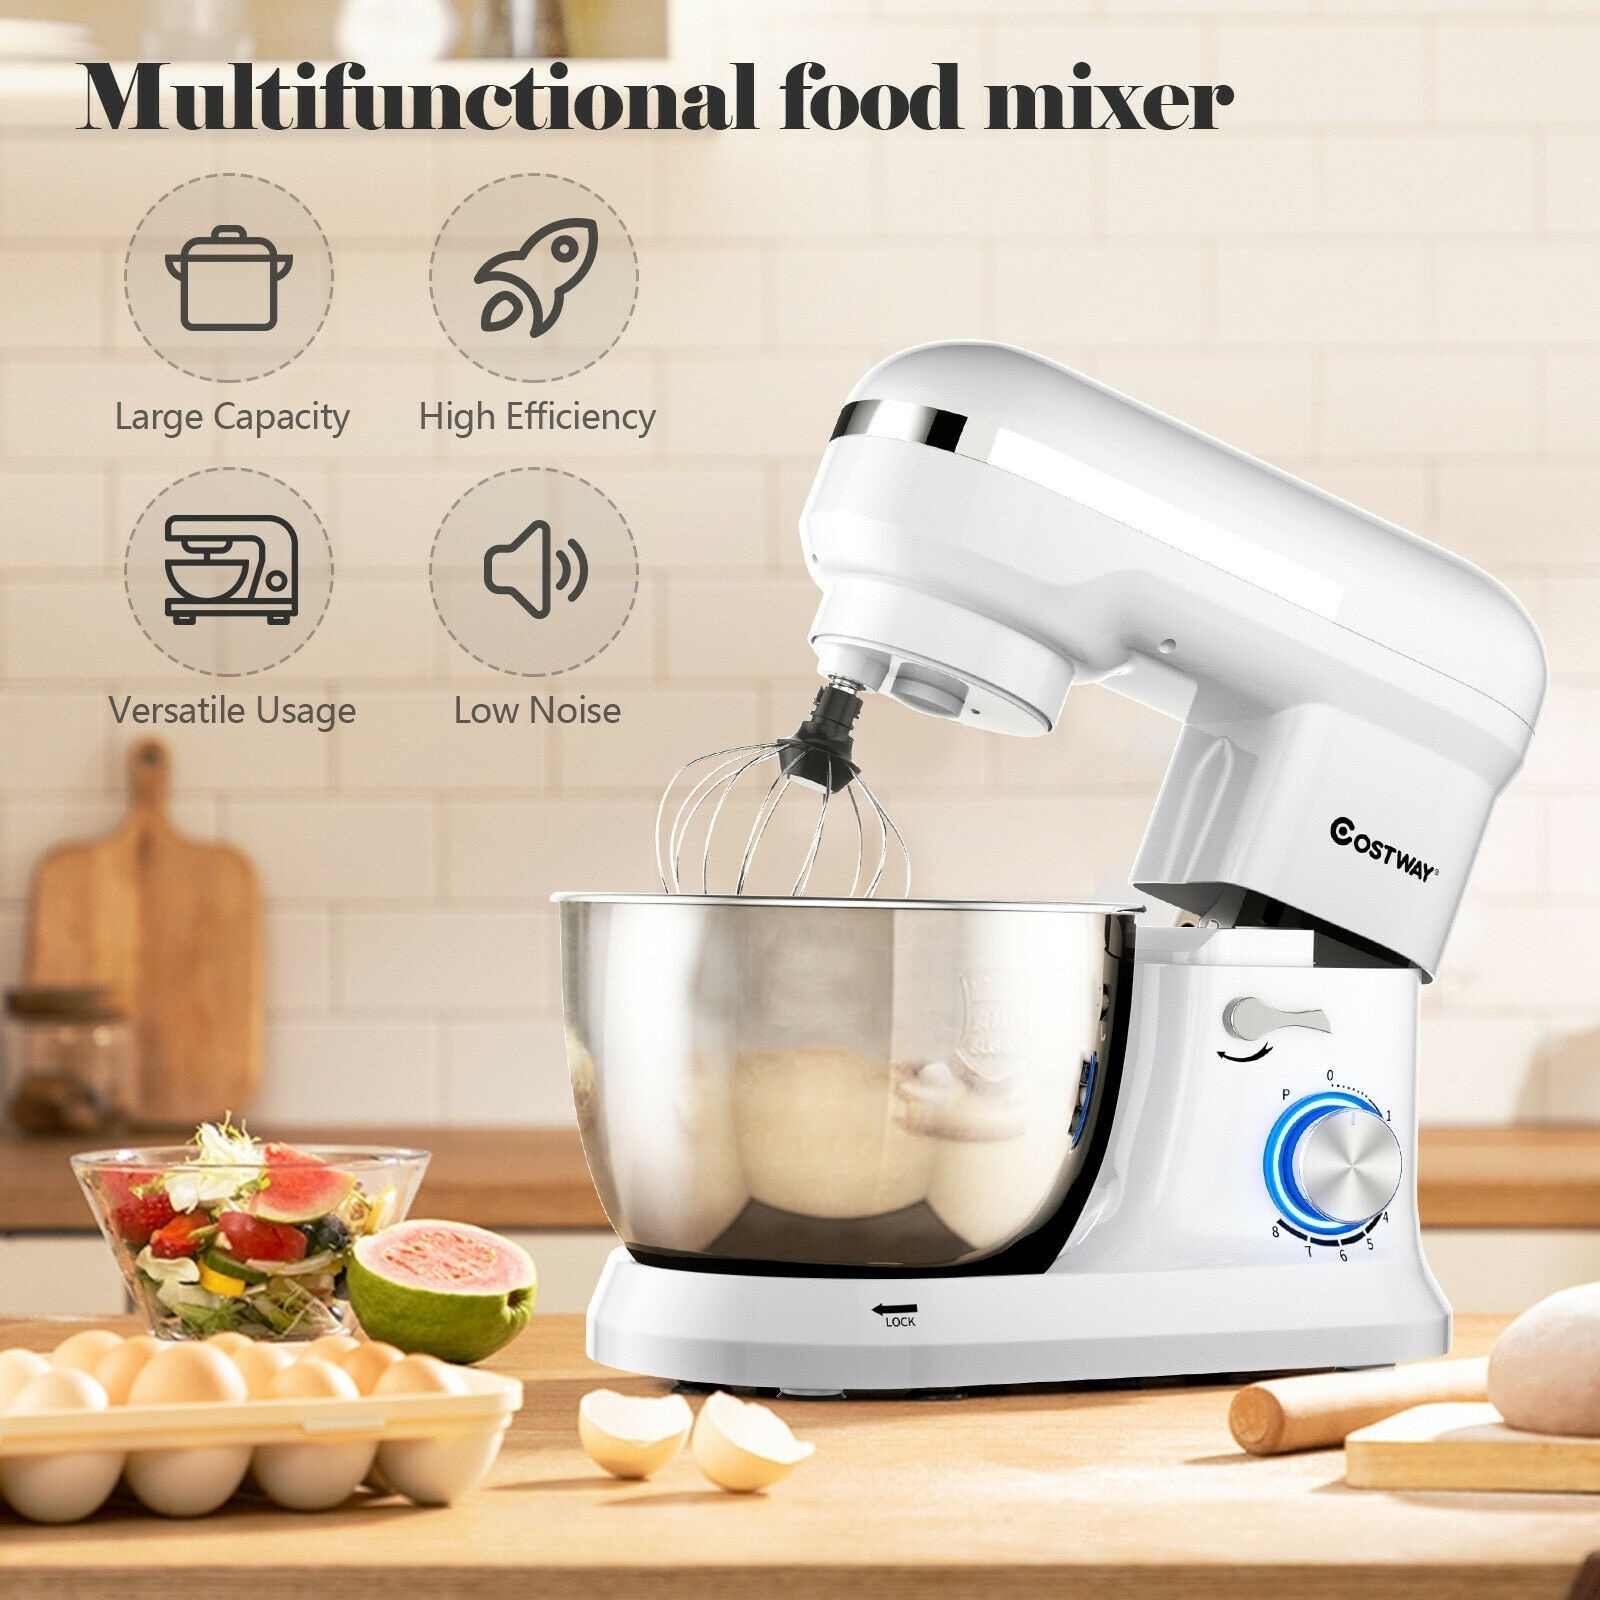 Multifunctional Cooking with Speed and Versatility